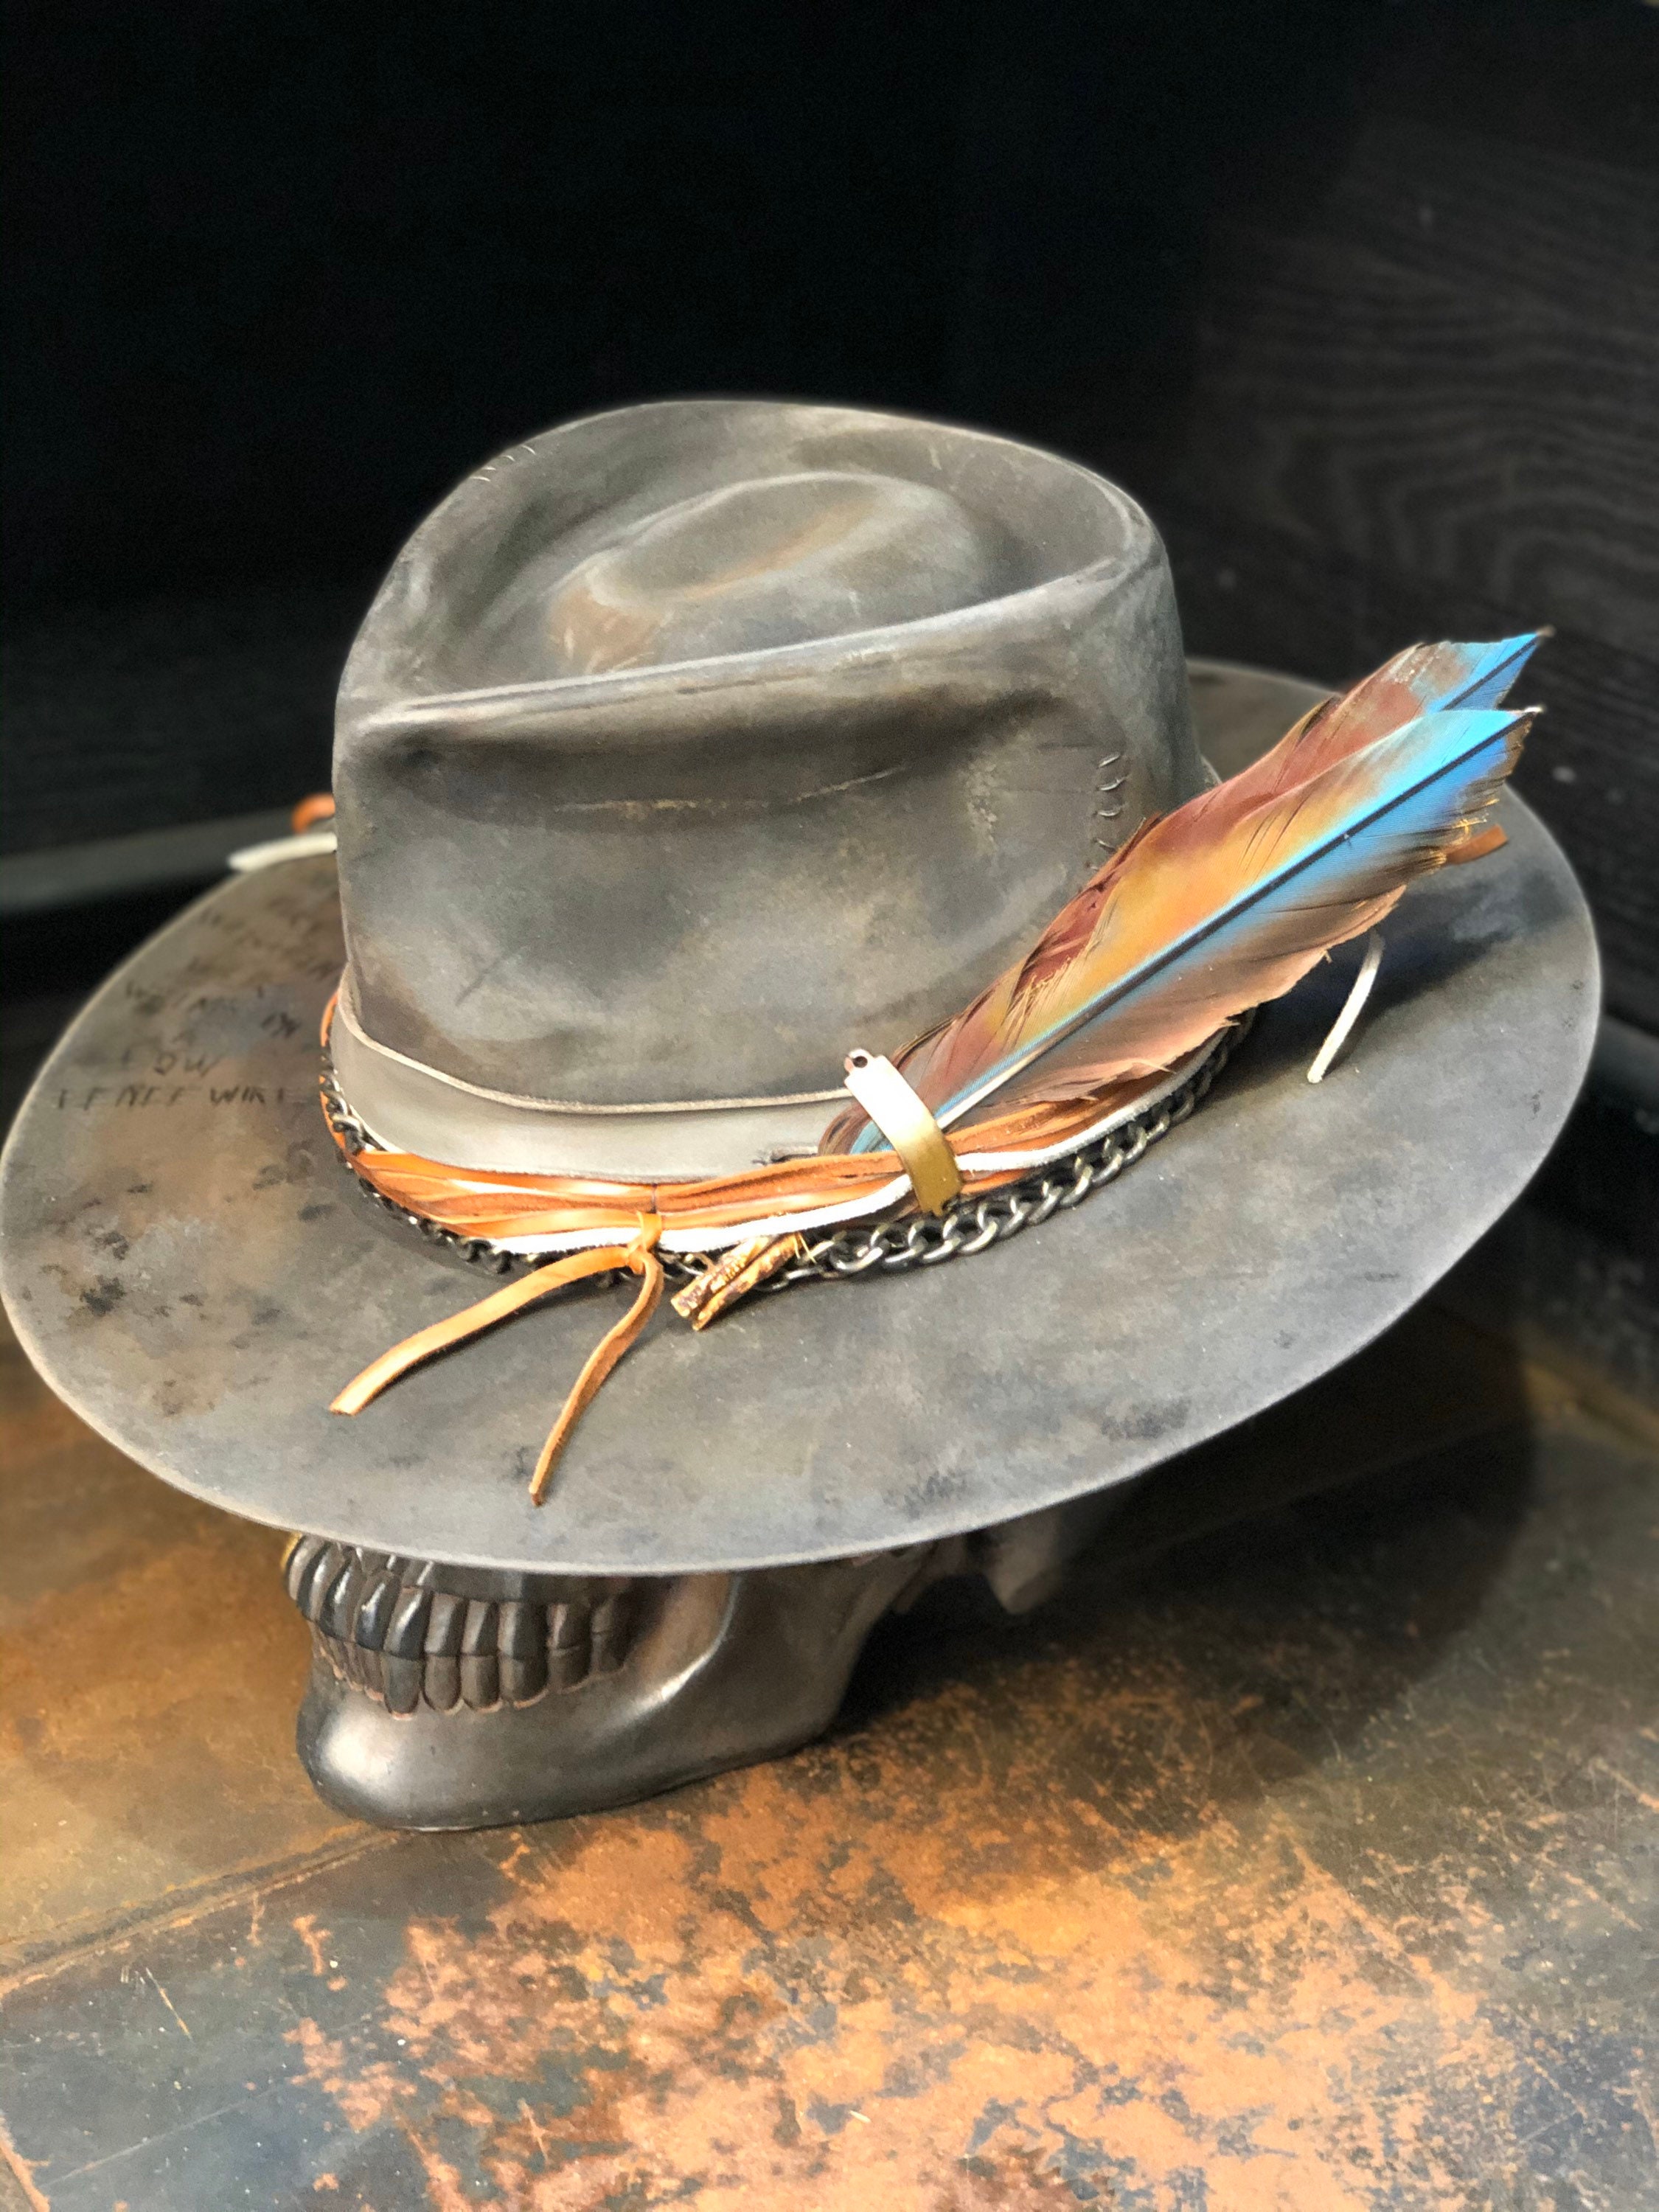 Stetson Resistol Hat  Cowboy Distressed Hats, The Kelly Hat - Head West